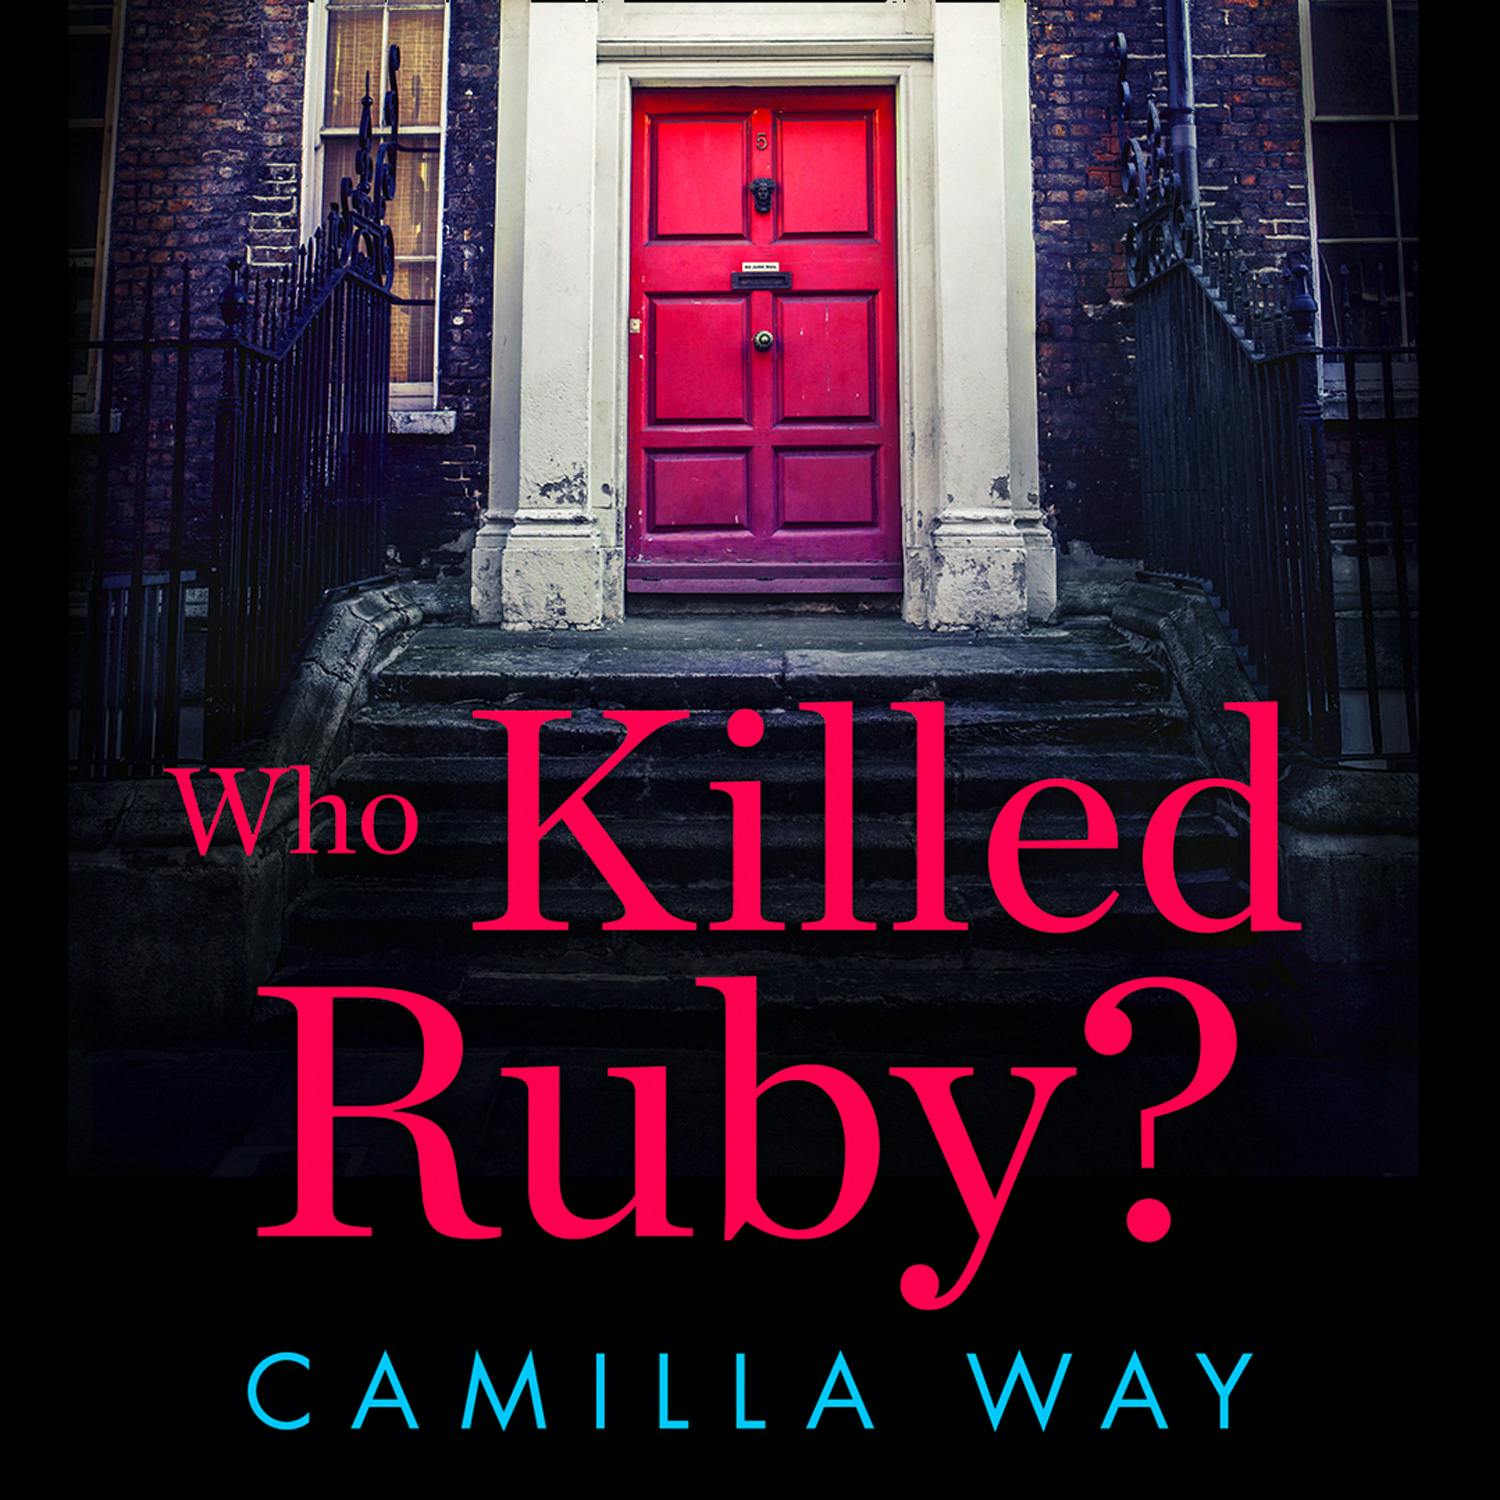 Who Killed Ruby? - undefined